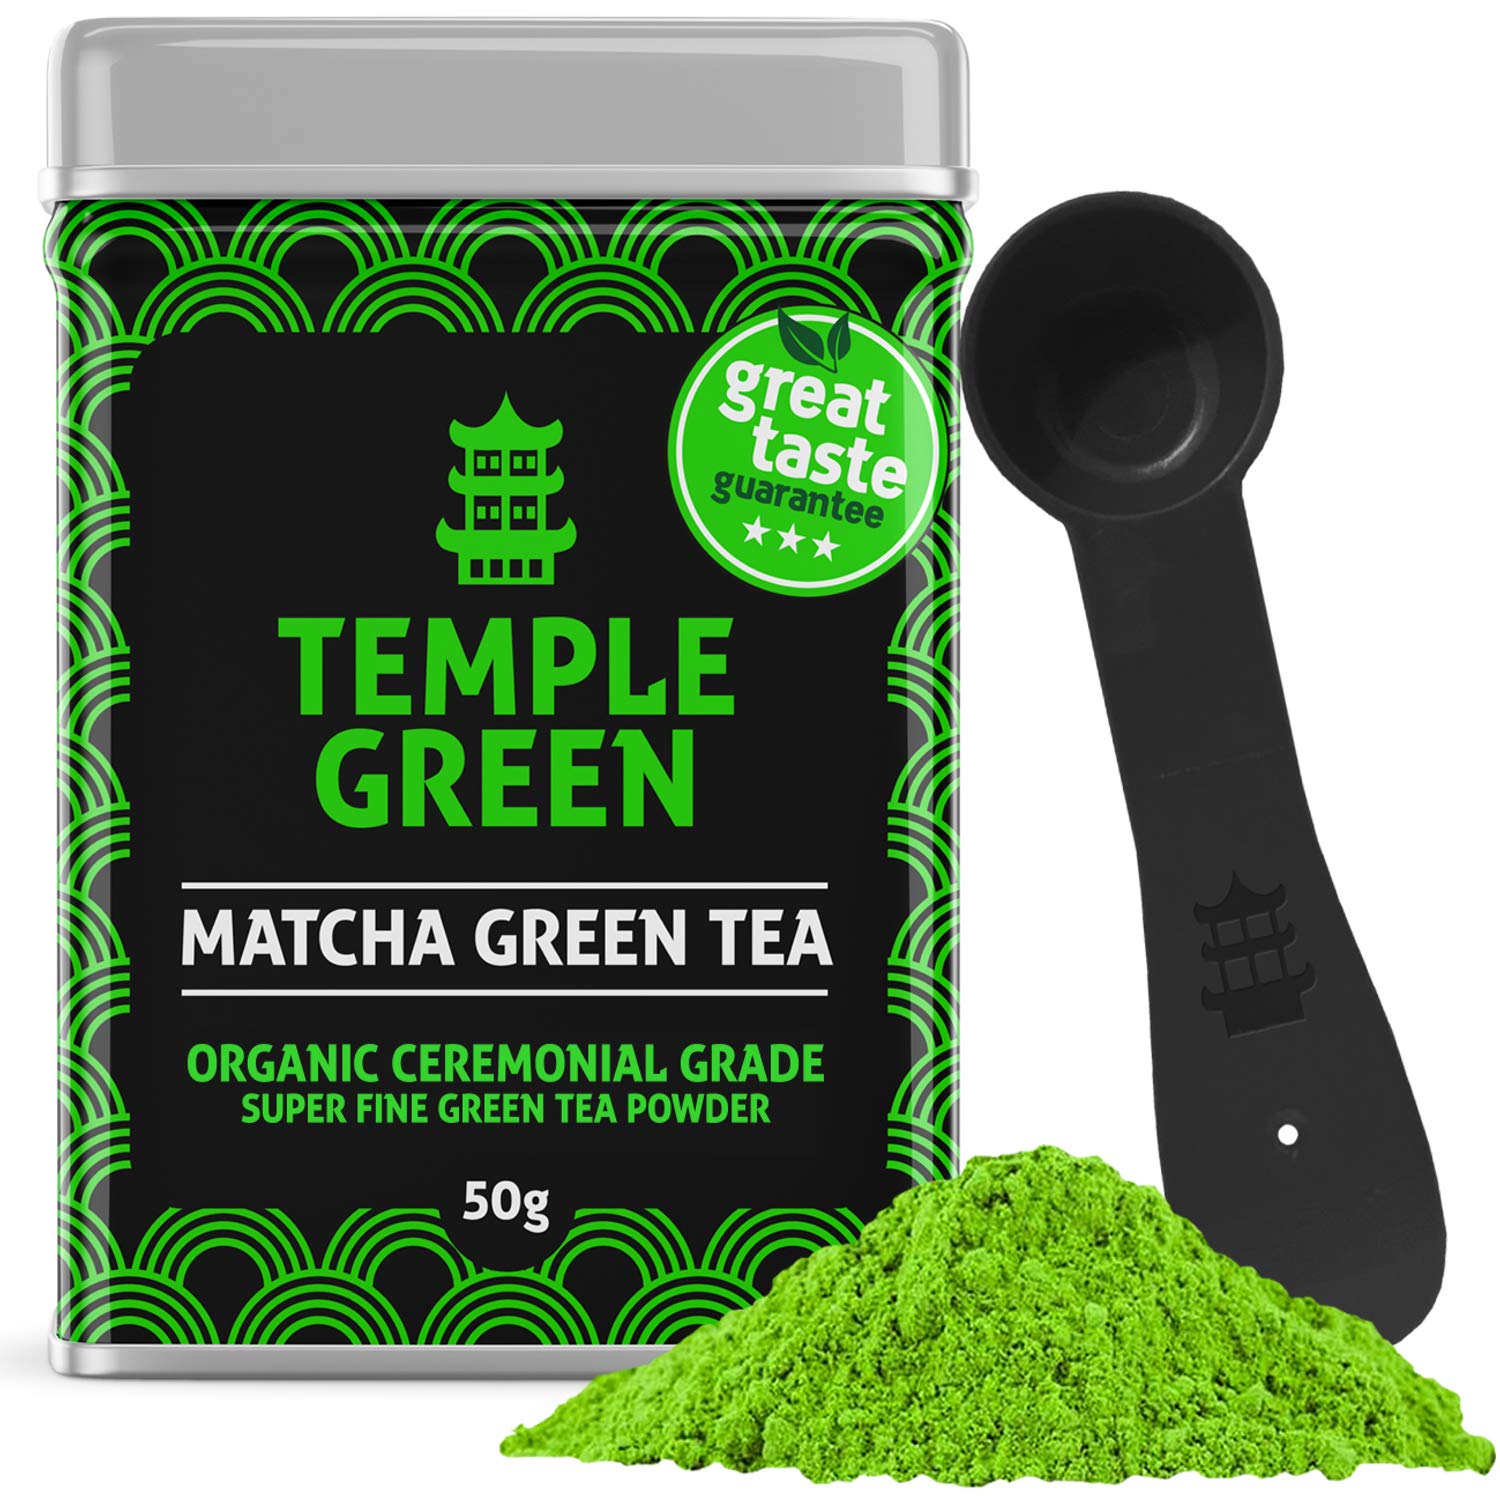 Temple Green Matcha Green Tea - Genuine Ceremonial Japanese Powder for Mood Energy Focus - All Organic Stone-Ground Ingredients for Health, Skin & Metabolism - Easy Mix Great Taste 50g Spoon & Guide